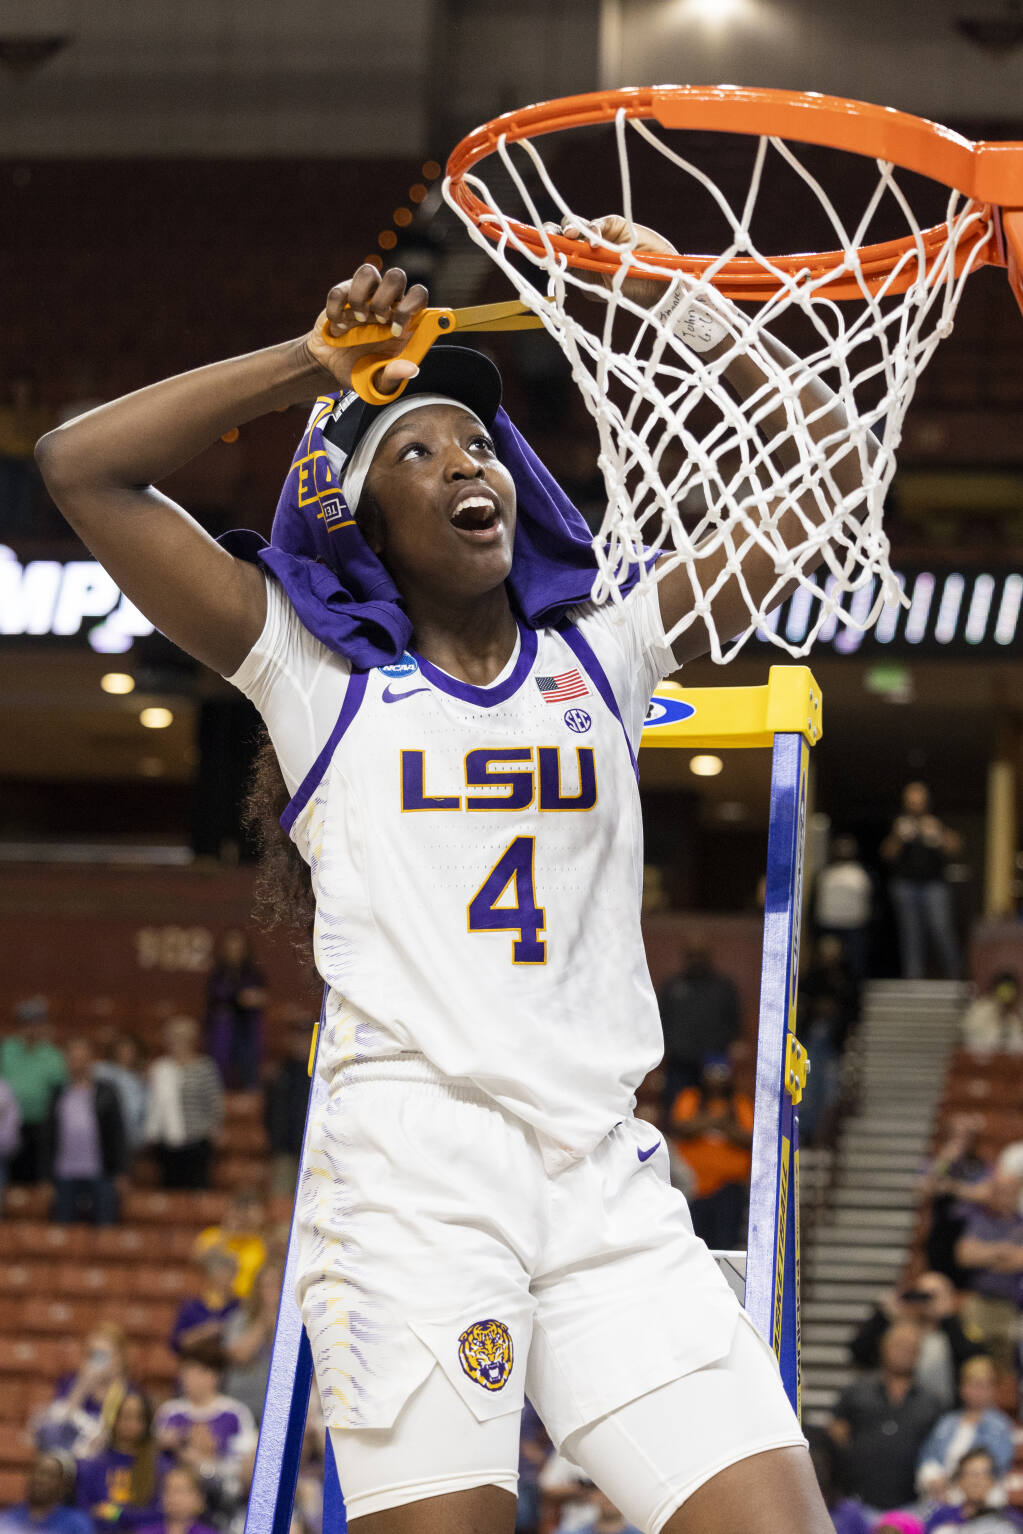 Why Does Angel Reese Cover One Leg? LSU Forward Reveals All